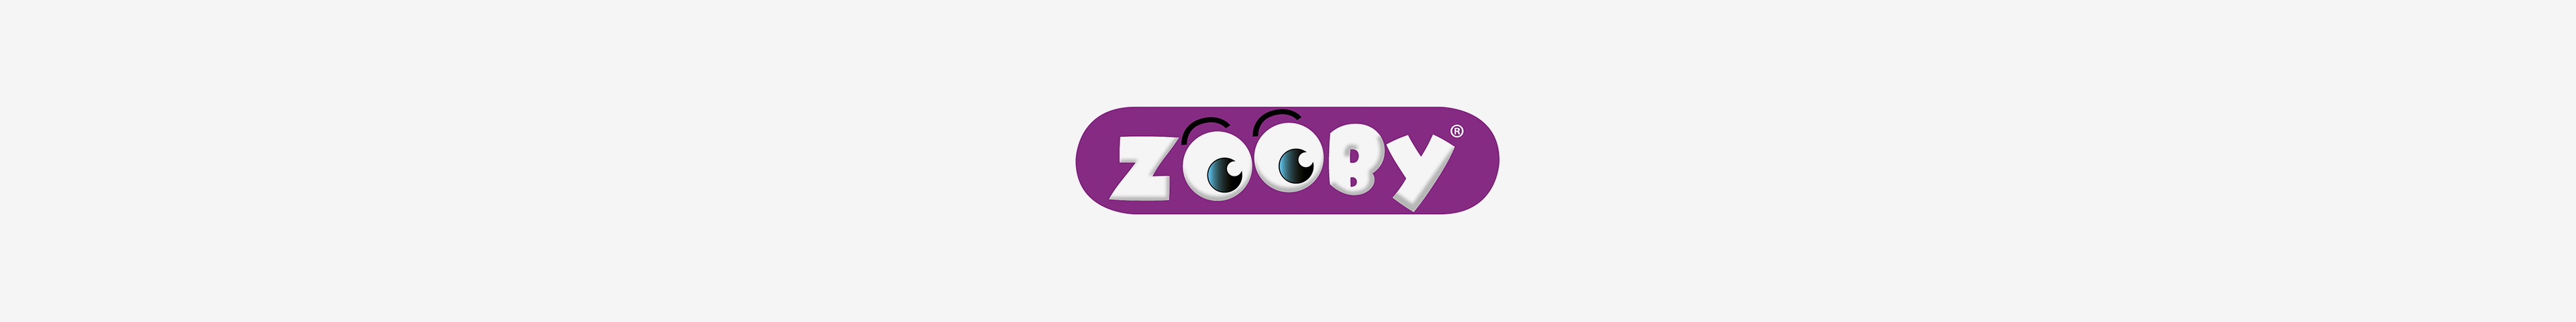 Zooby